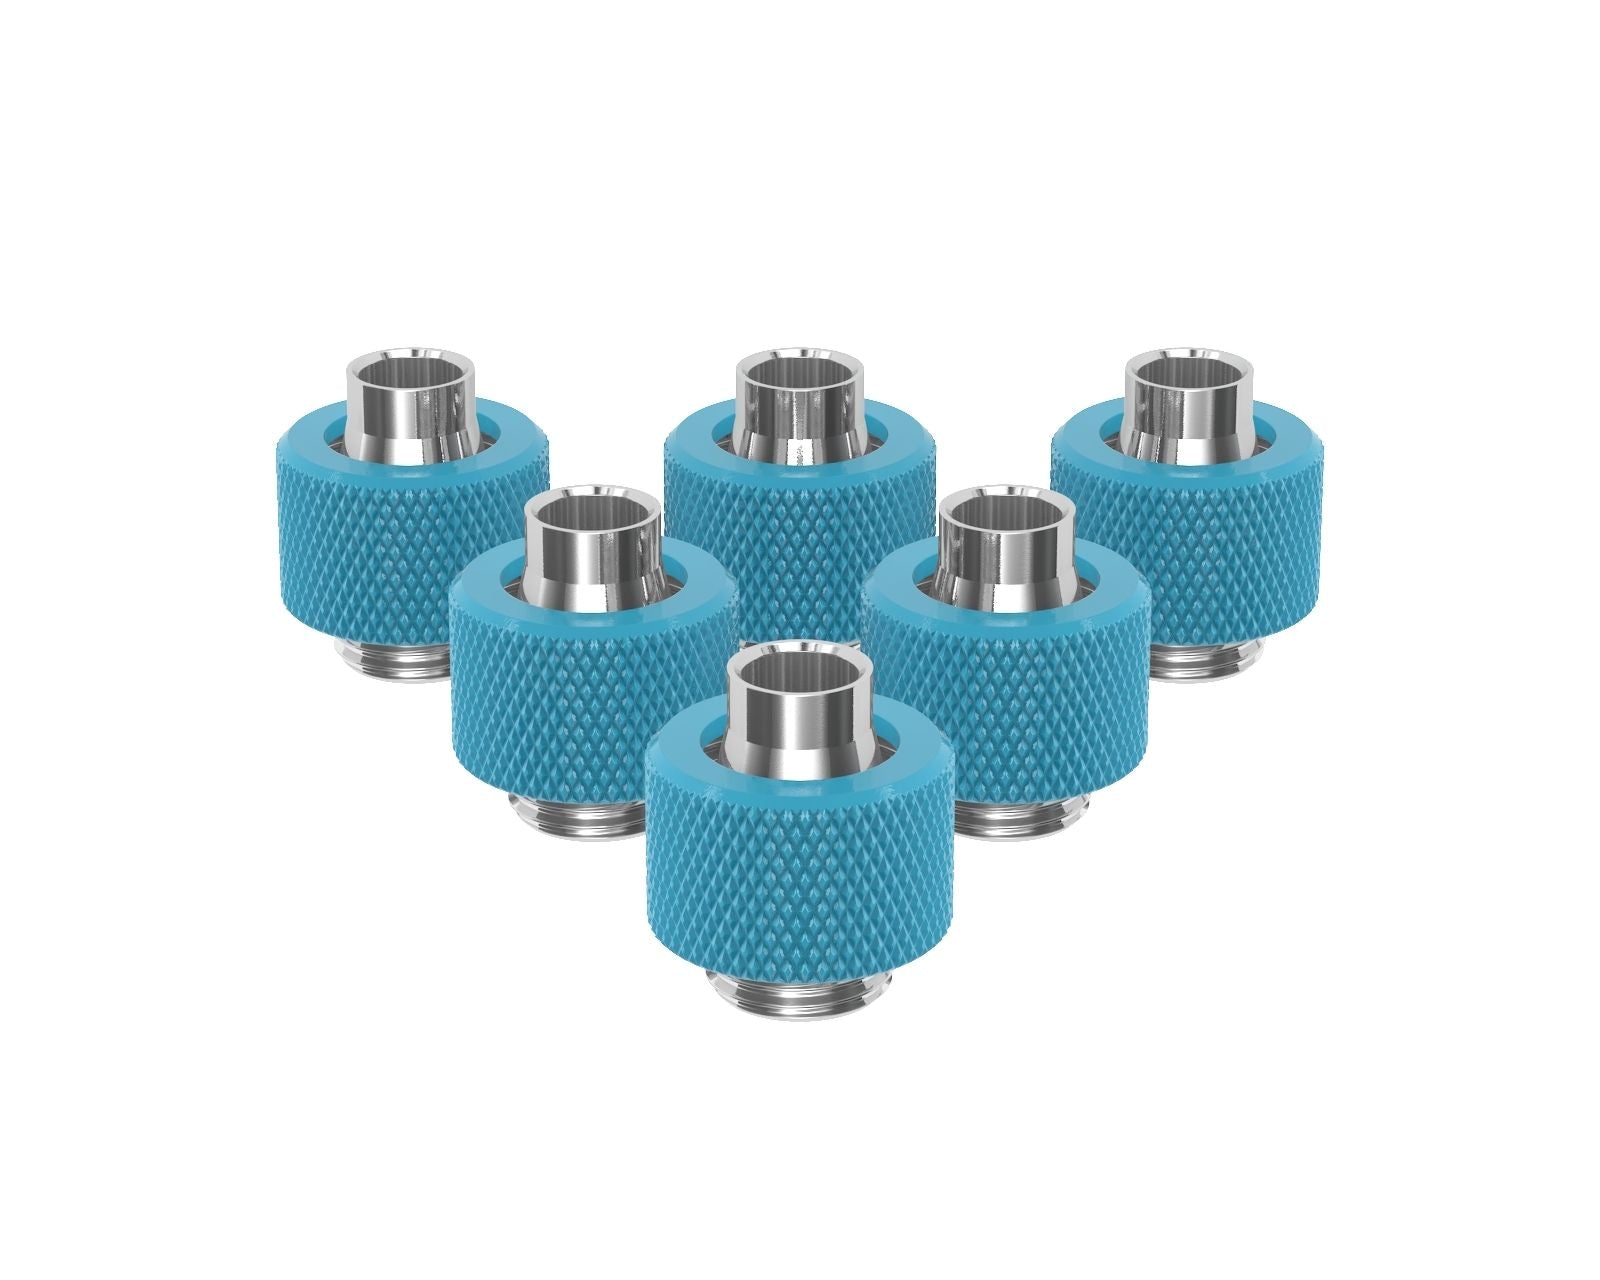 PrimoChill SecureFit SX - Premium Compression Fitting For 3/8in ID x 1/2in OD Flexible Tubing 6 Pack (F-SFSX12-6) - Available in 20+ Colors, Custom Watercooling Loop Ready - Sky Blue